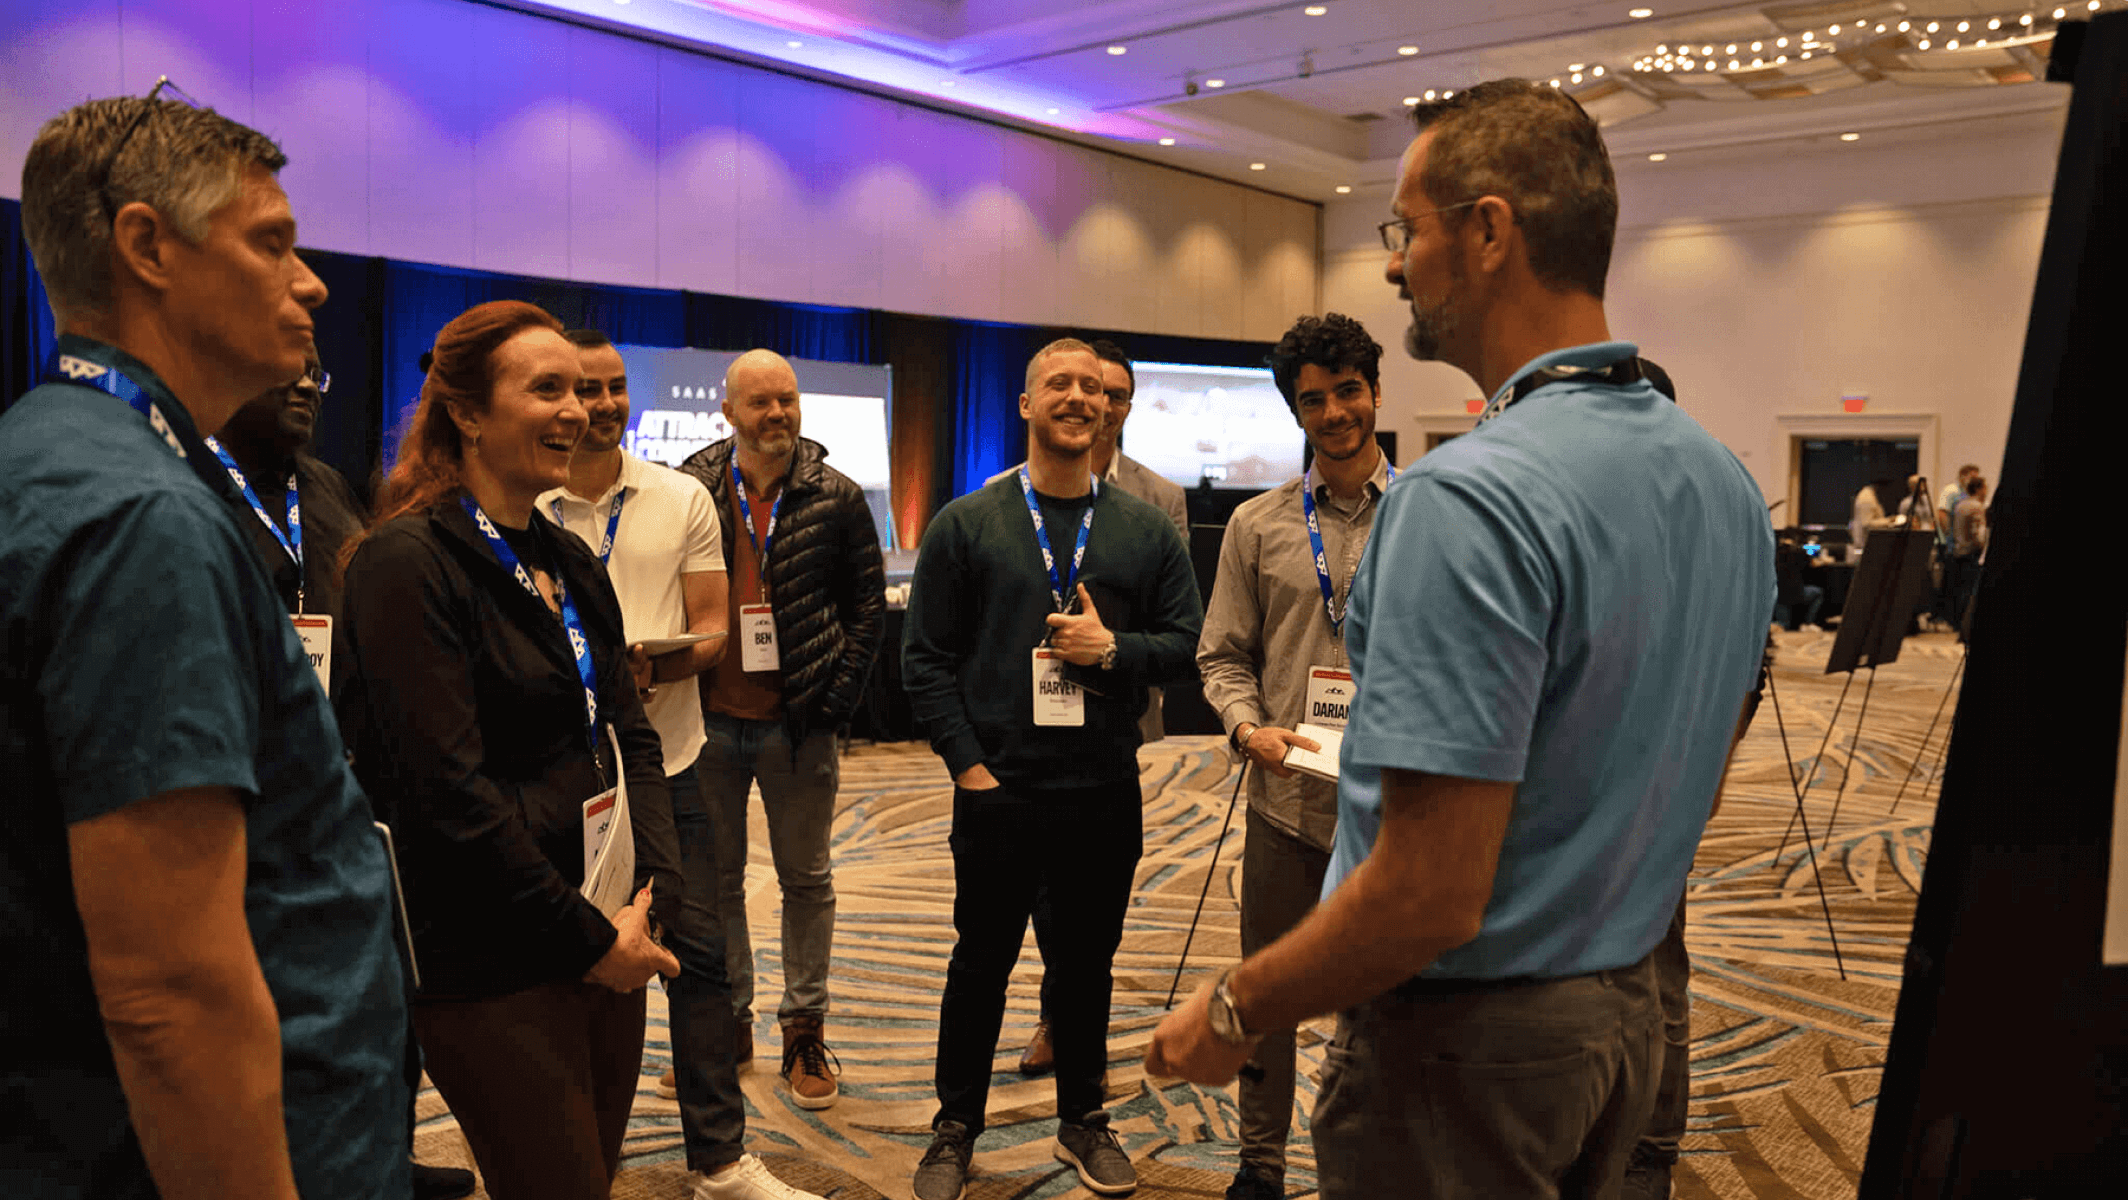 A group of conference attendees laughing together